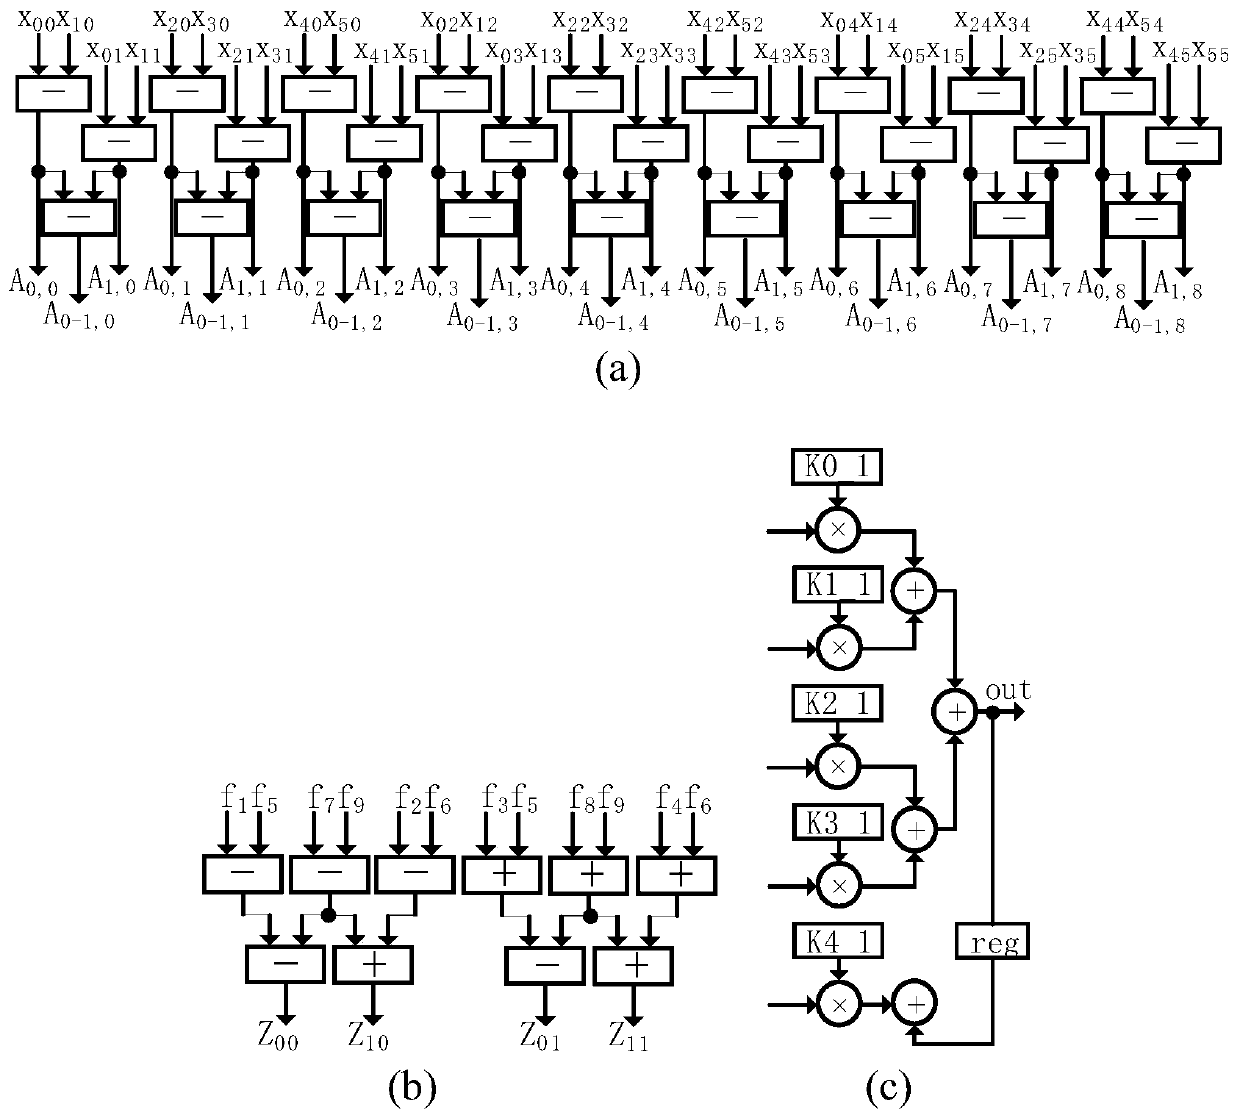 A convolutional neural network accelerator circuit based on a fast filtering algorithm